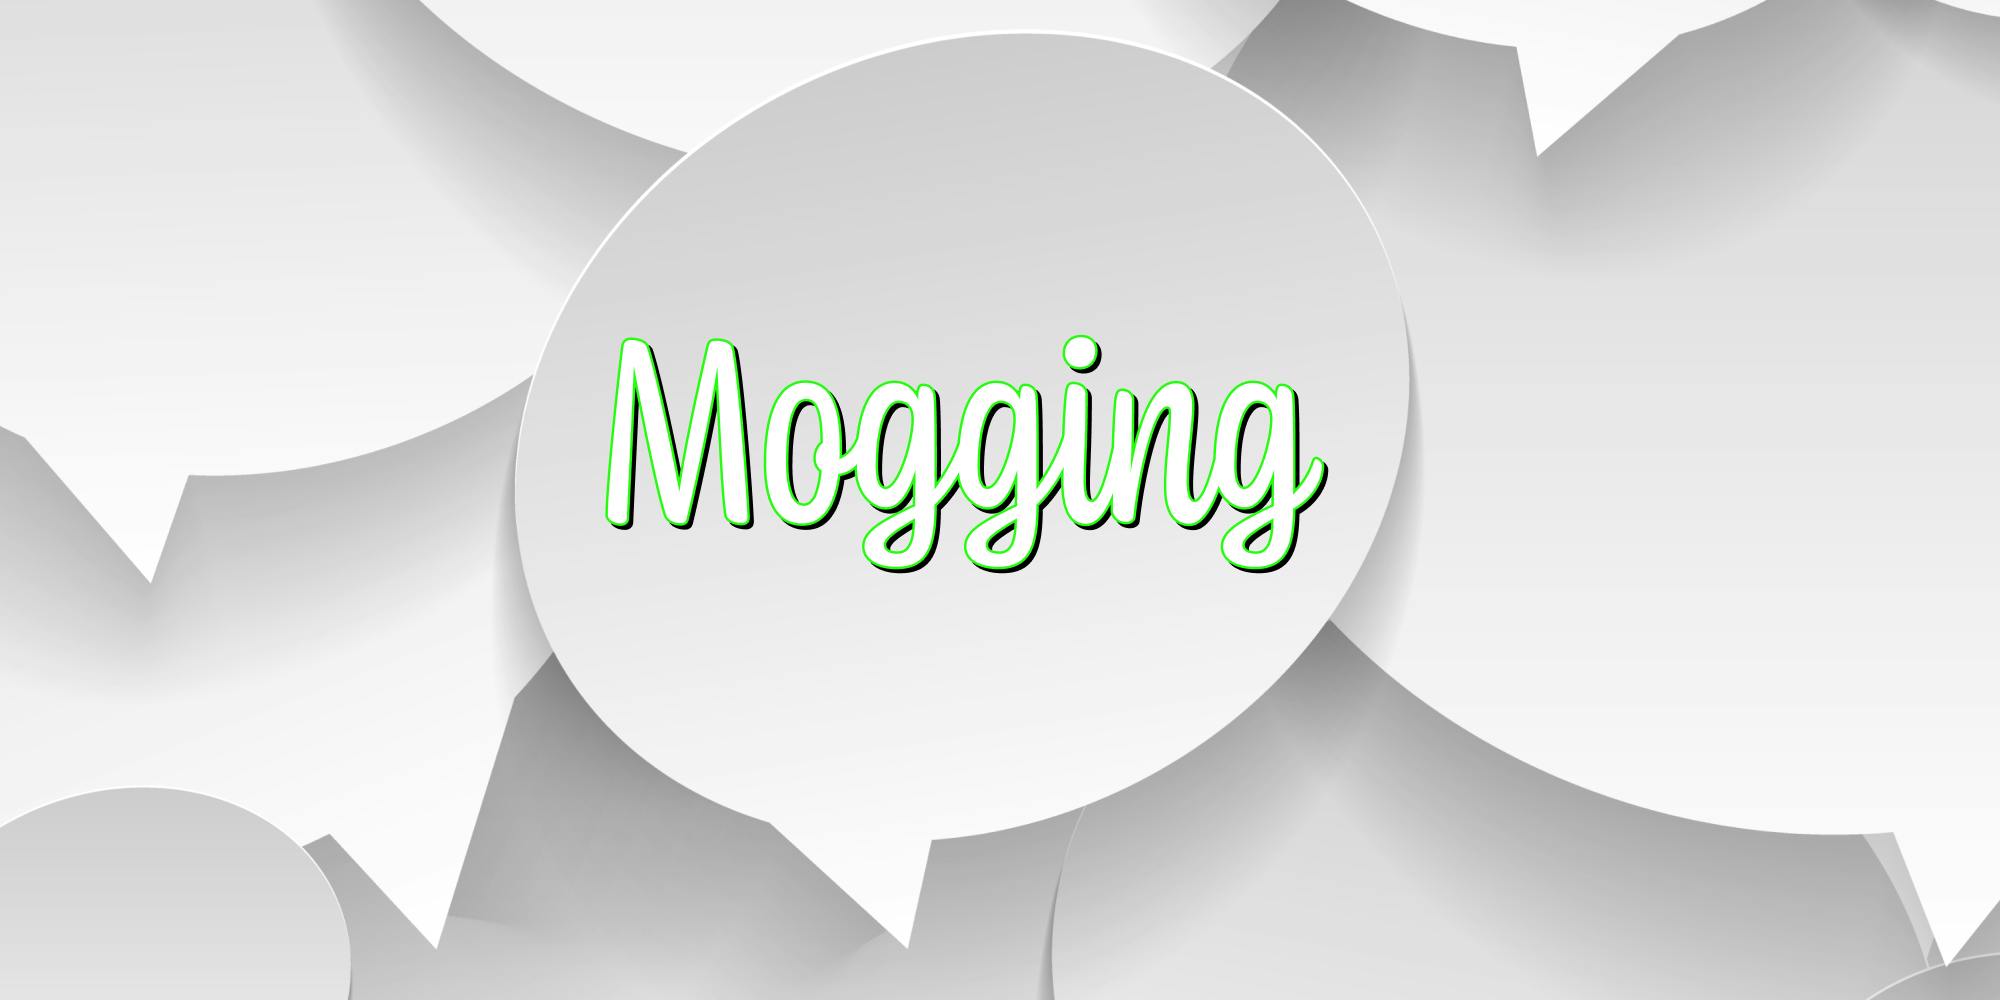 Scrolling In The Deep: Is someone ‘mogging’ you?